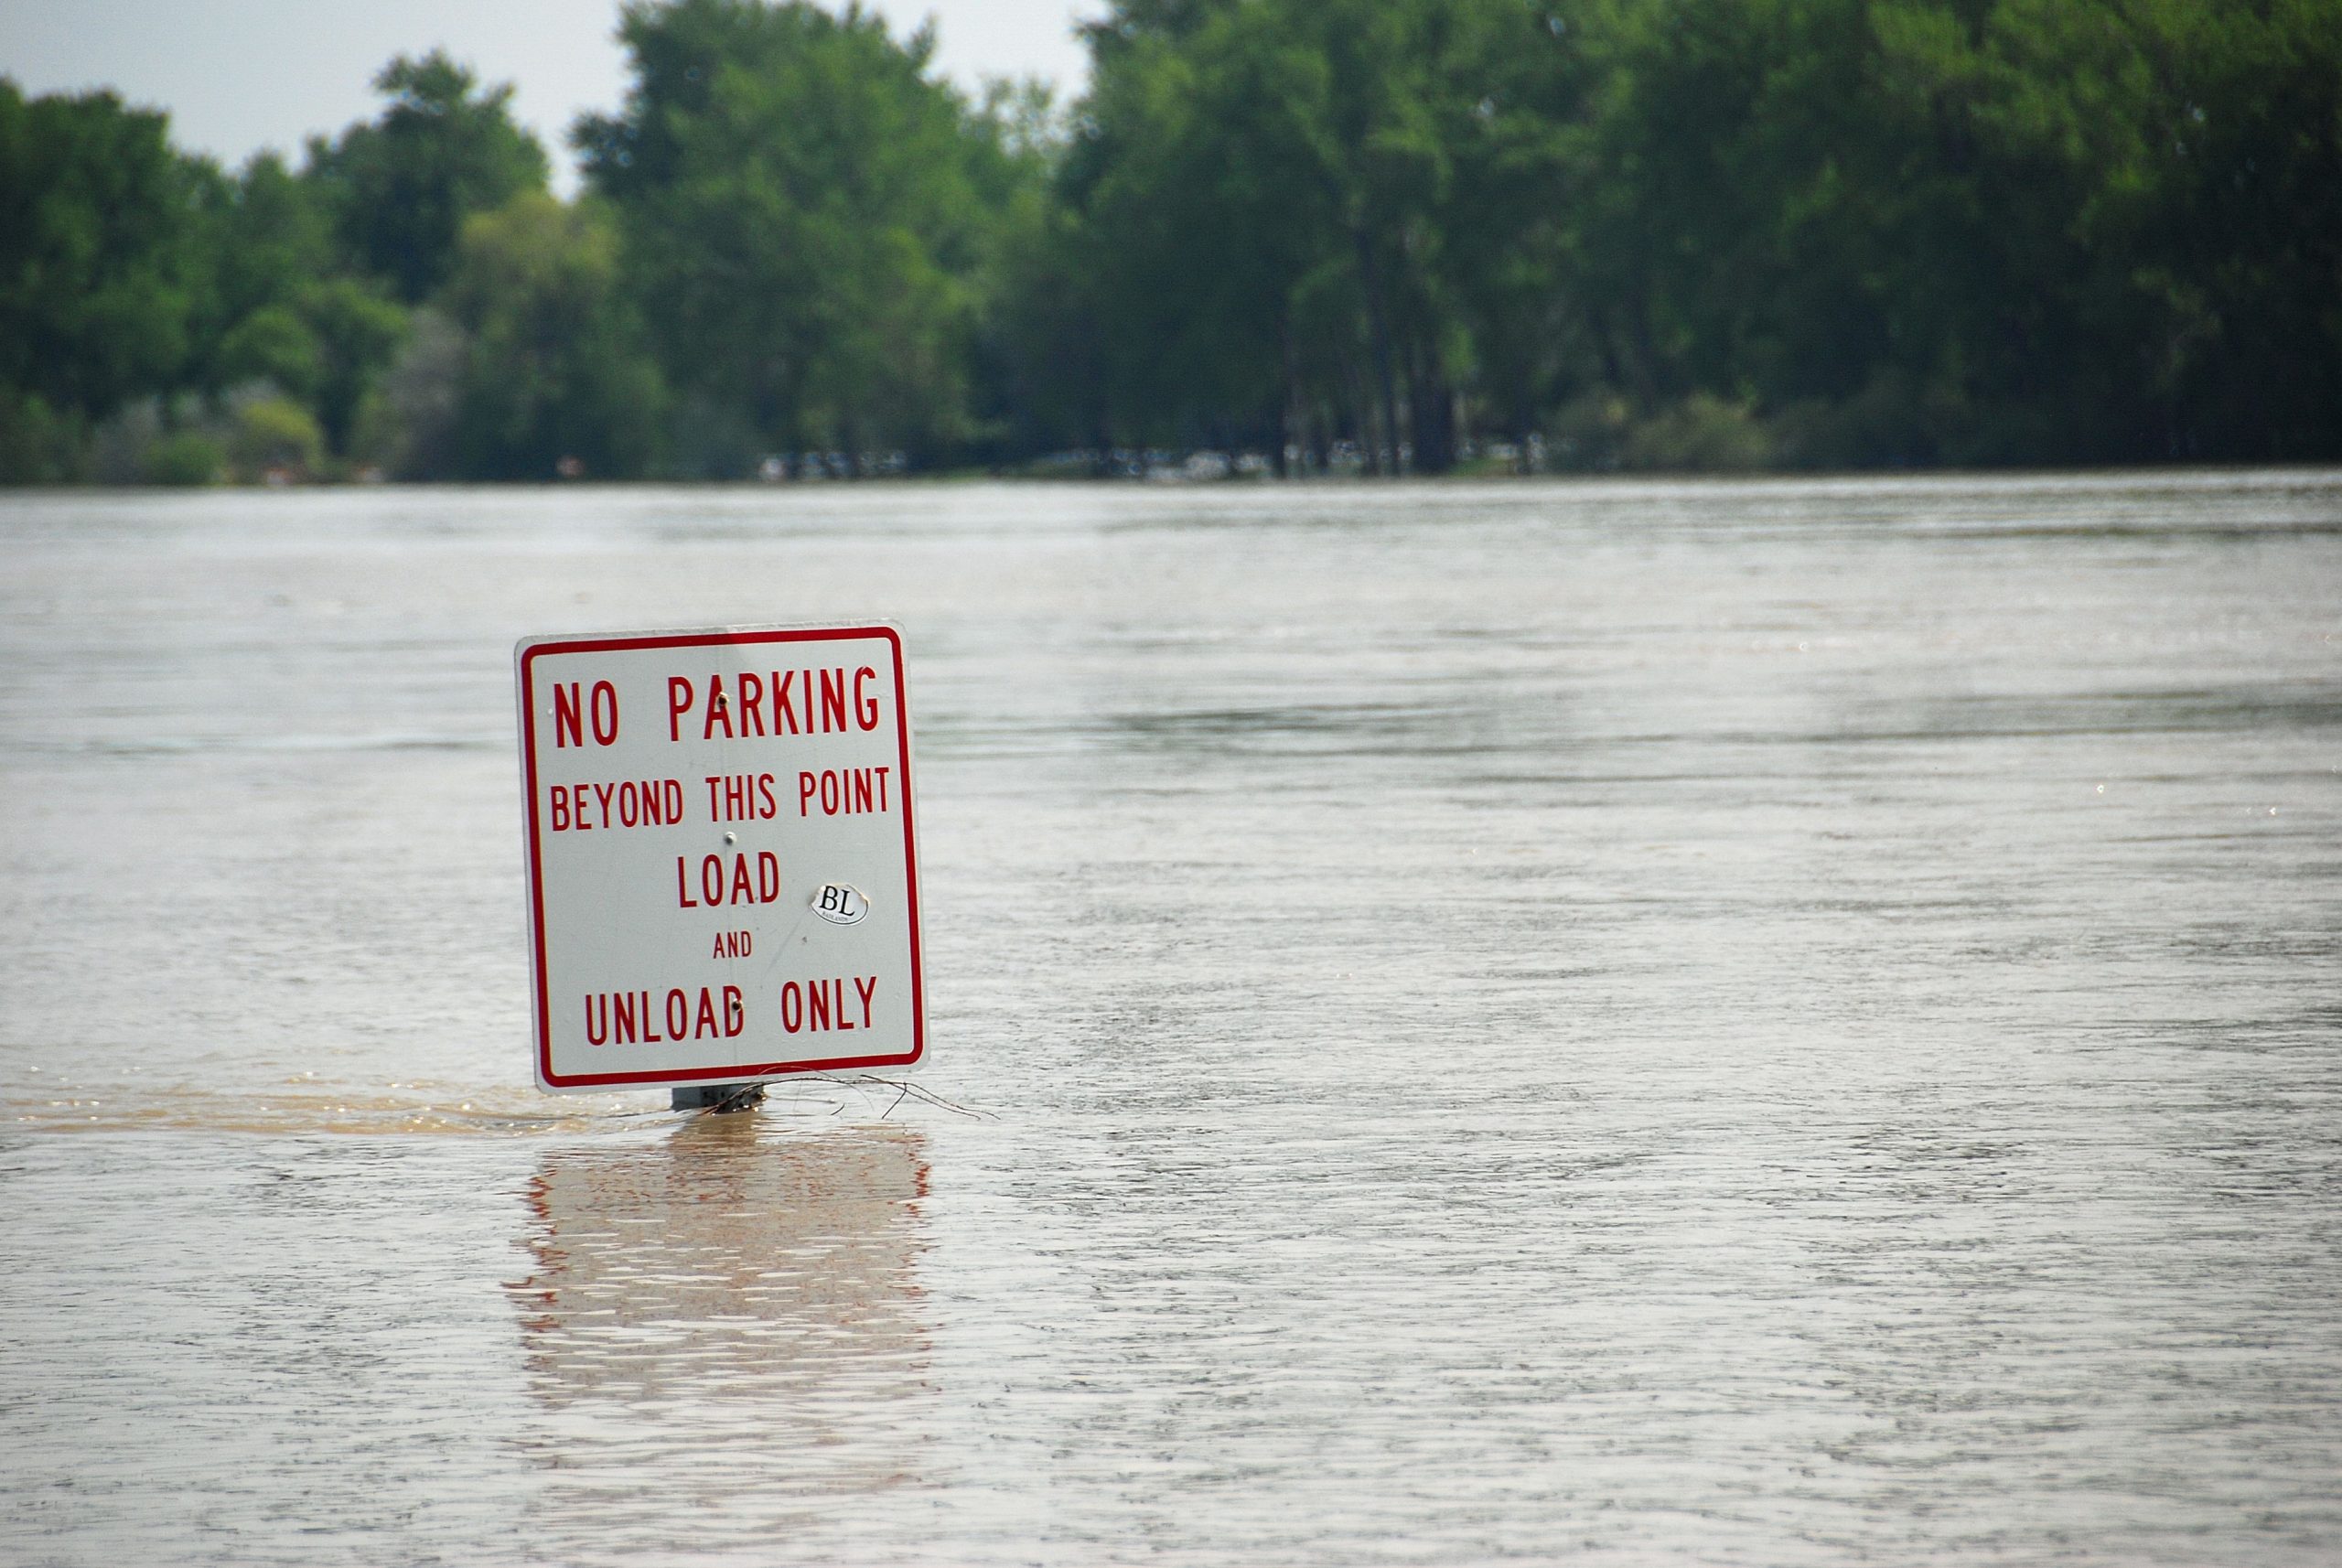 The Flooding reaches the top of street signs.